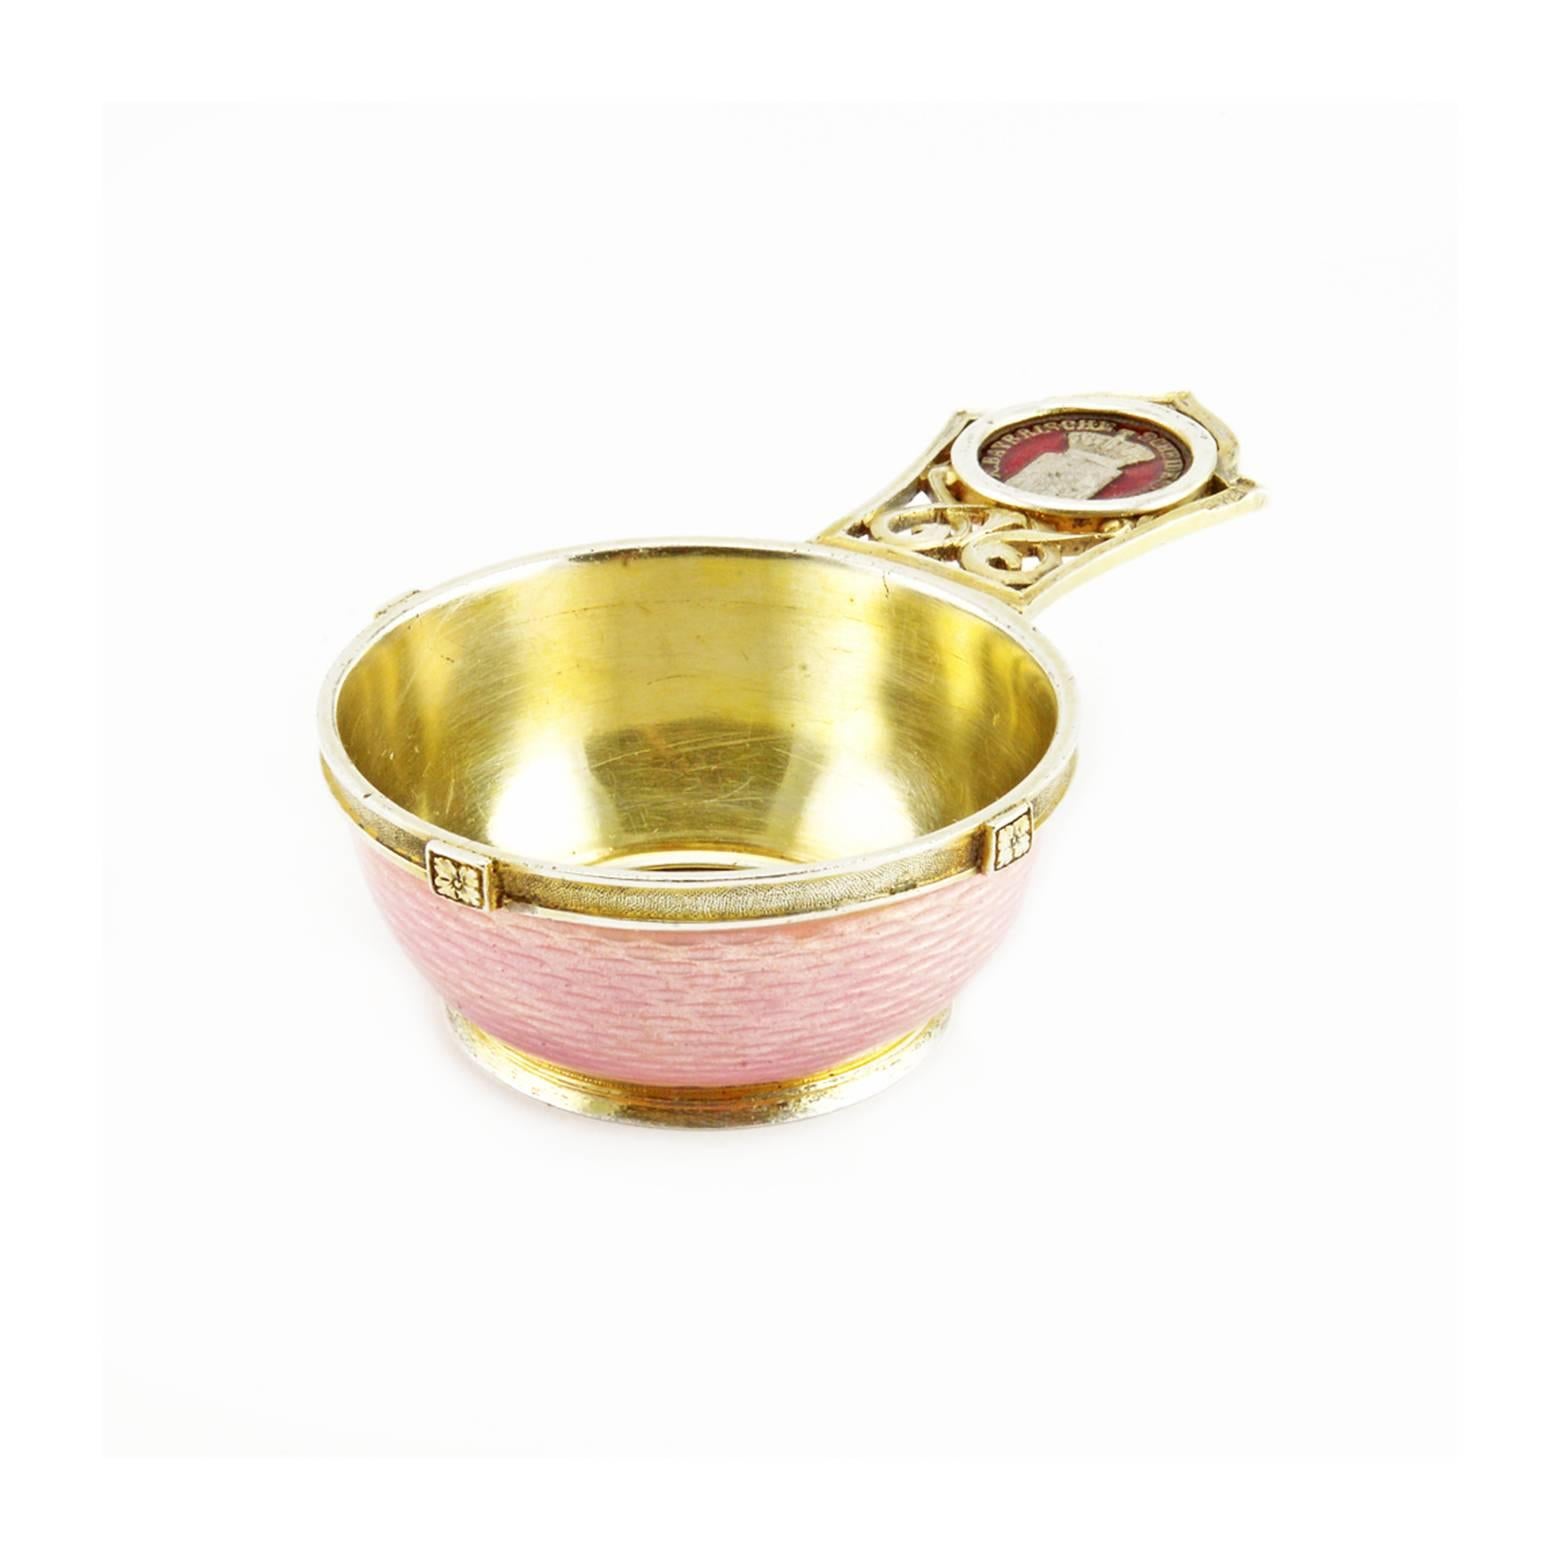 A Russian gilded silver and guilloché enamel miniature kovsh with coins, Saint Petersburg, 1904-1908. Of traditional shape, the exterior of the bowl enameled a pale translucent pink over an engine-turned ground, the interior of the bowl set with a